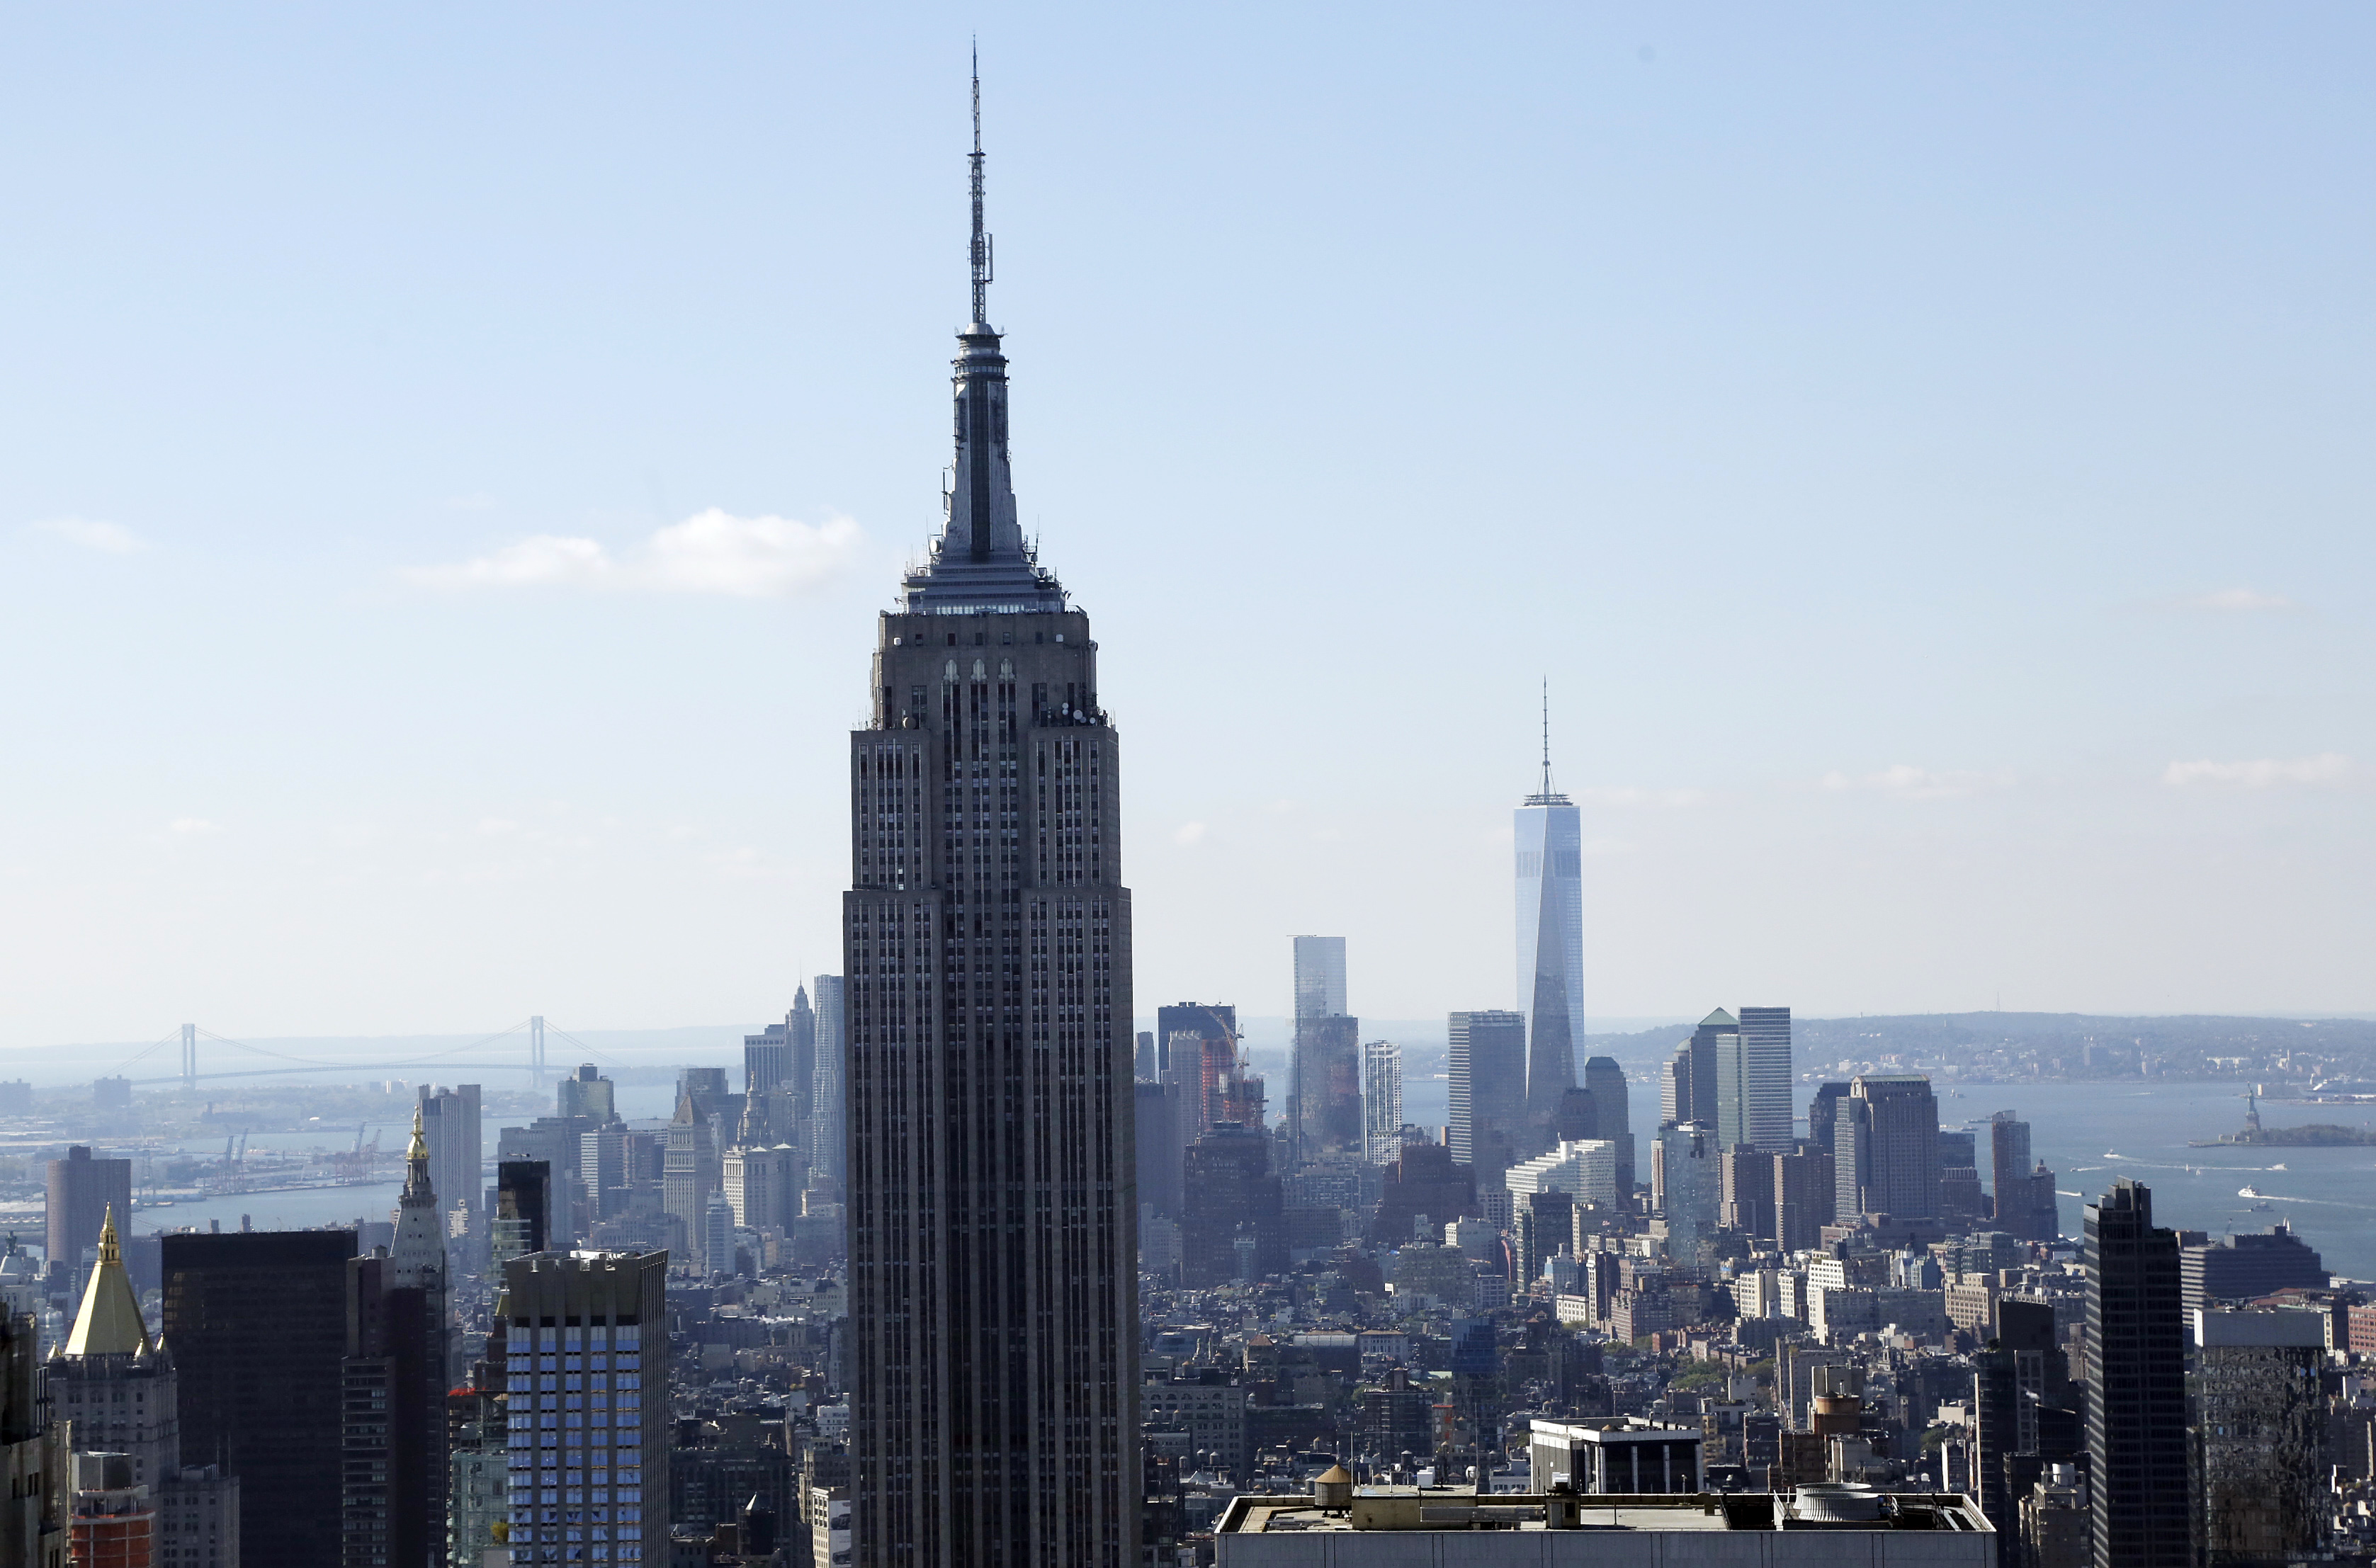 FILE - The Empire State Building and the Manhattan skyline are seen from the Rainbow Room, New York Citys landmark restaurant atop 30 Rockefeller Plaza, in this Sunday, Oct. 5, 2014 file photo. Hundreds of people will take to the stairs at the Empire State Building on Wednesday night Feb. 4, 2015, climbing from the lobby to the 86th floor observatory. They'll be going up the 1,576 steps as part of the 38th annual Empire State Building Run-Up. (AP Photo/Mark Lennihan, File)